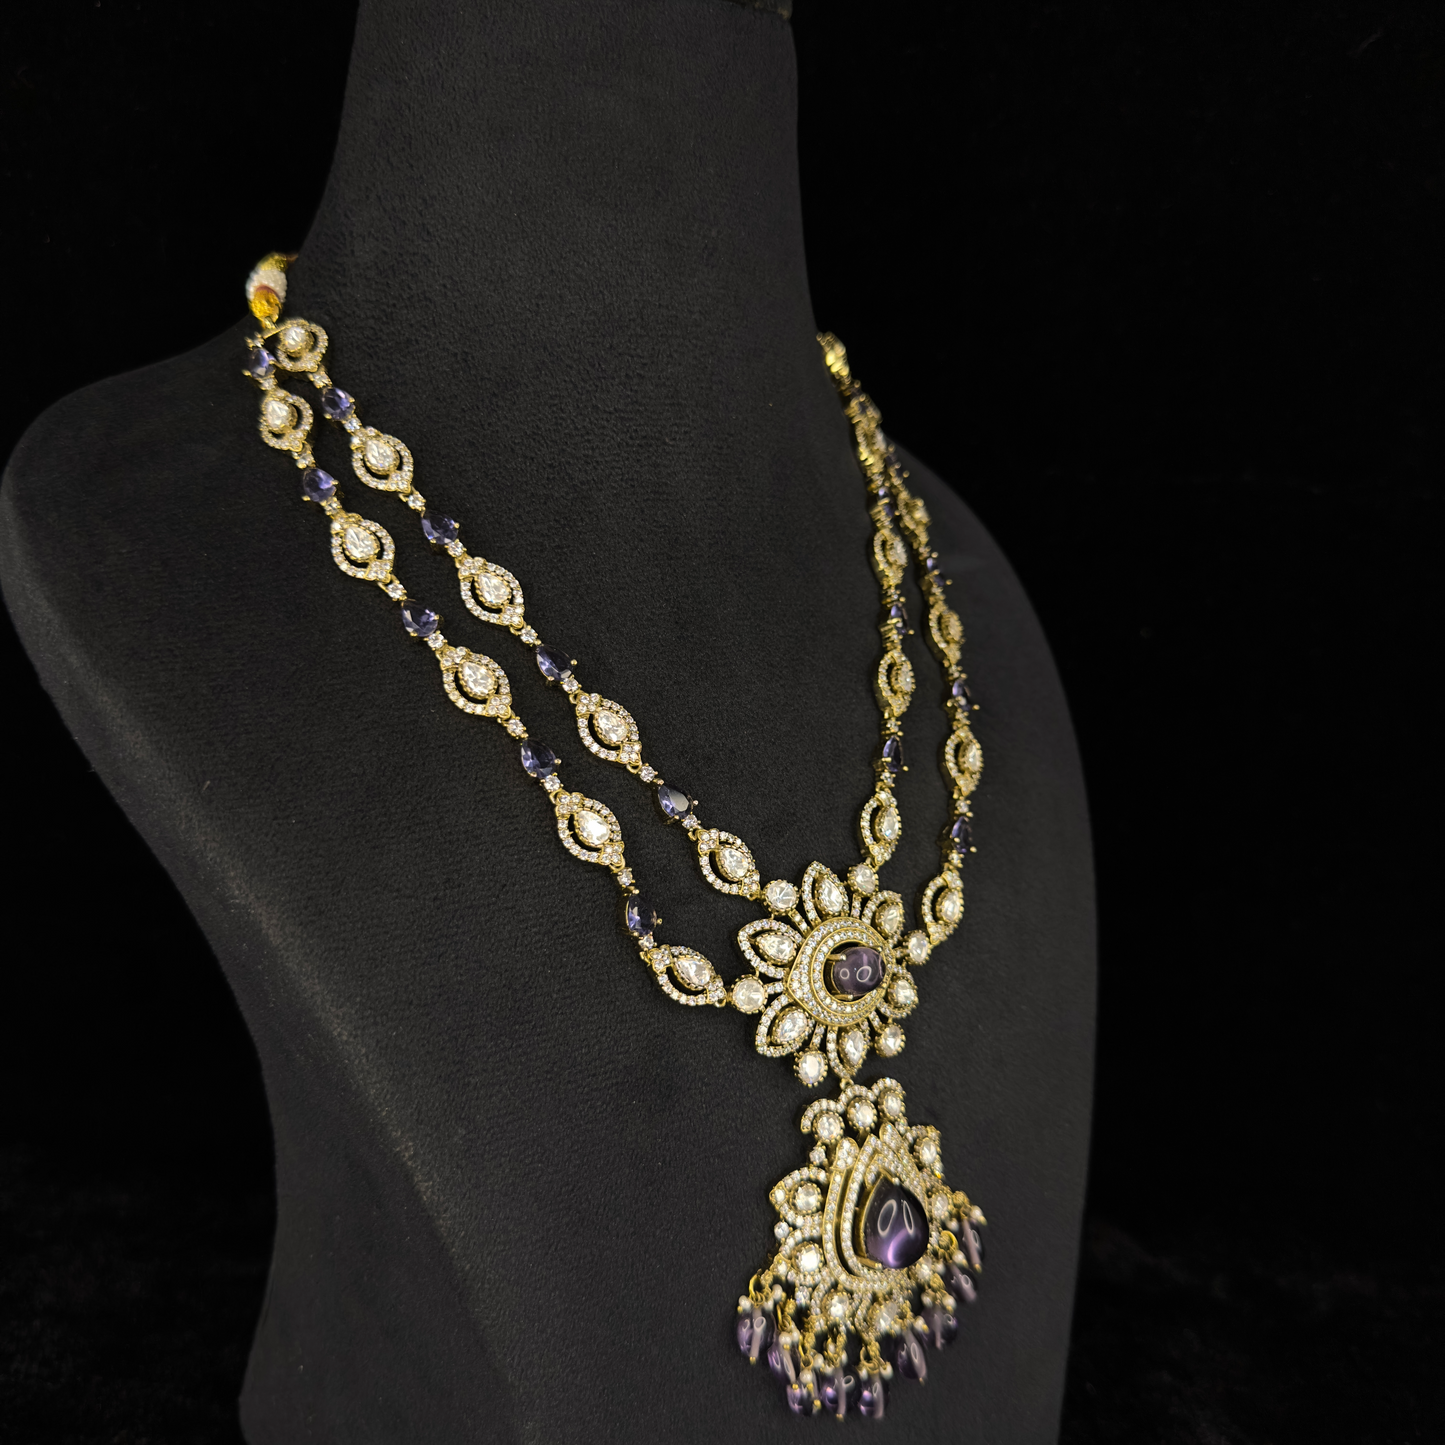 Traditional Two-Line Victorian Necklace Set with Earrings